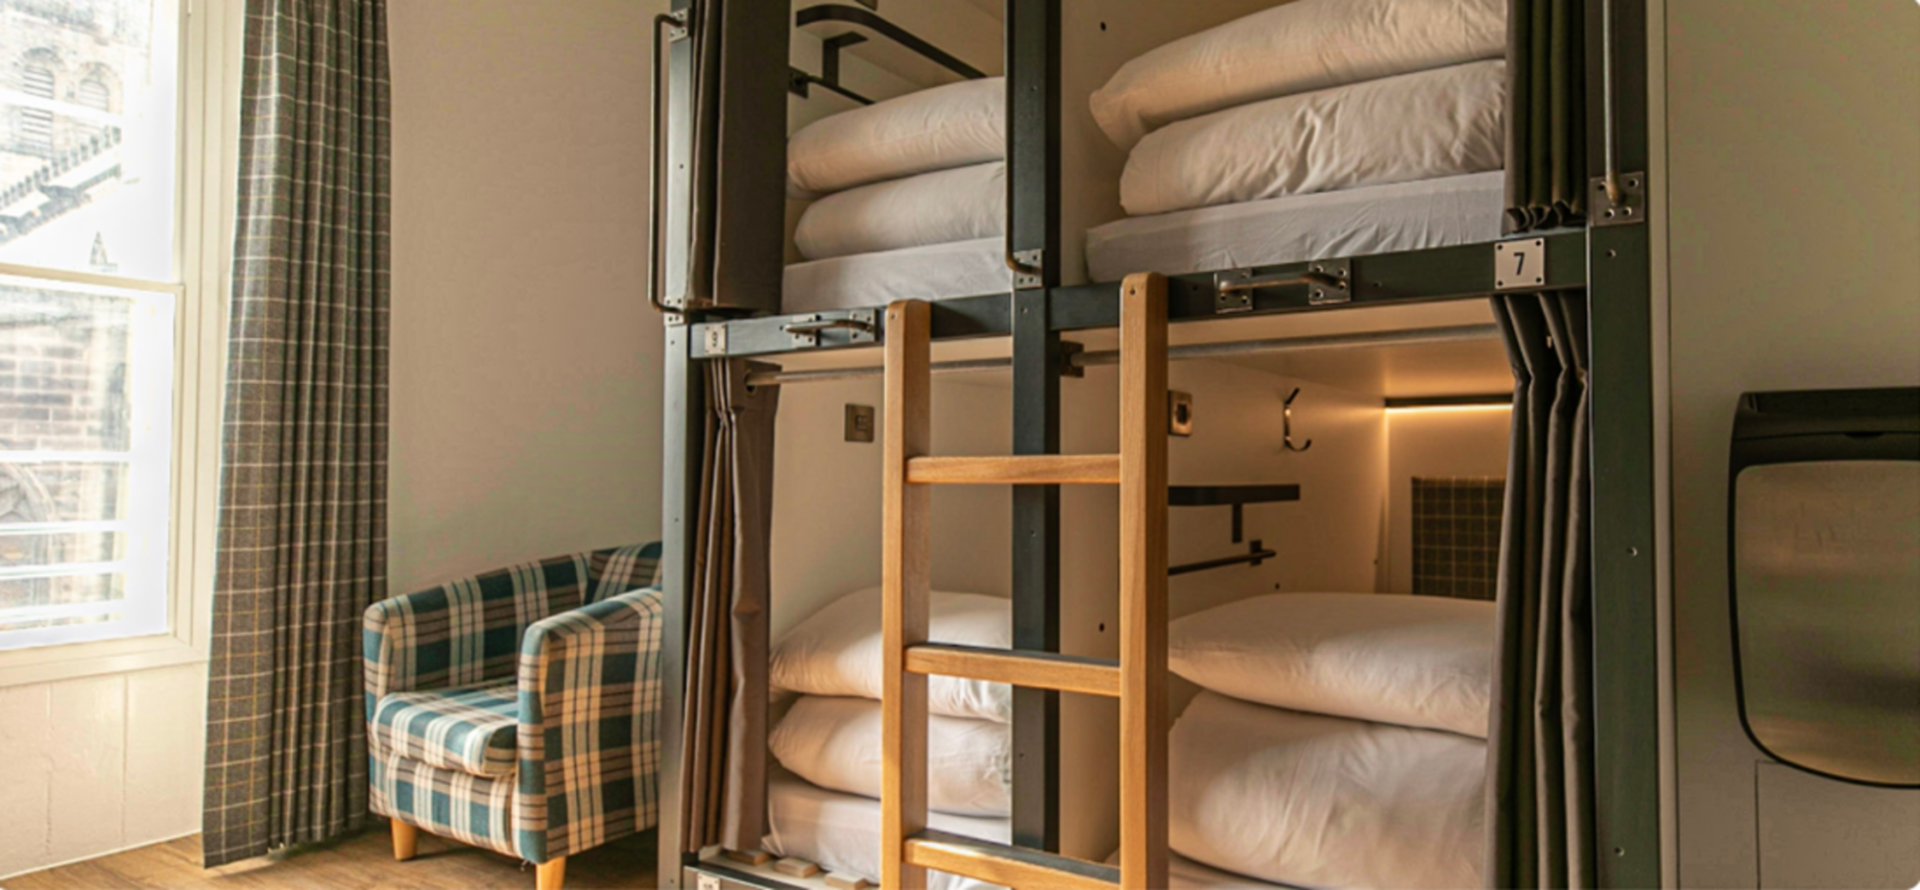 4 sleeping pod bunk beds. with curtains, clean linen and private lights, Code Hostels